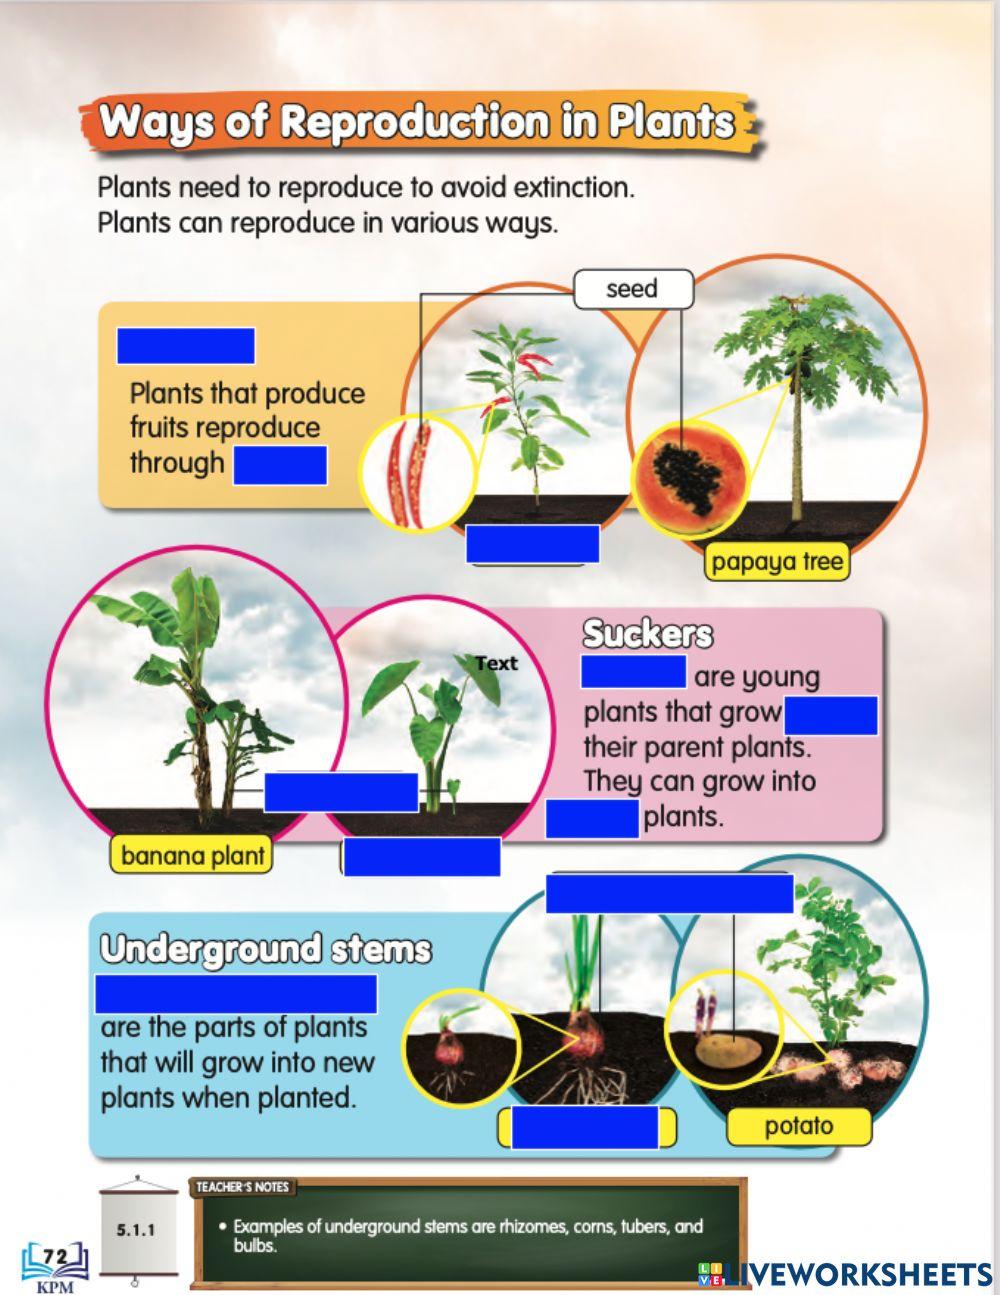 Ways of reproduction in Plants